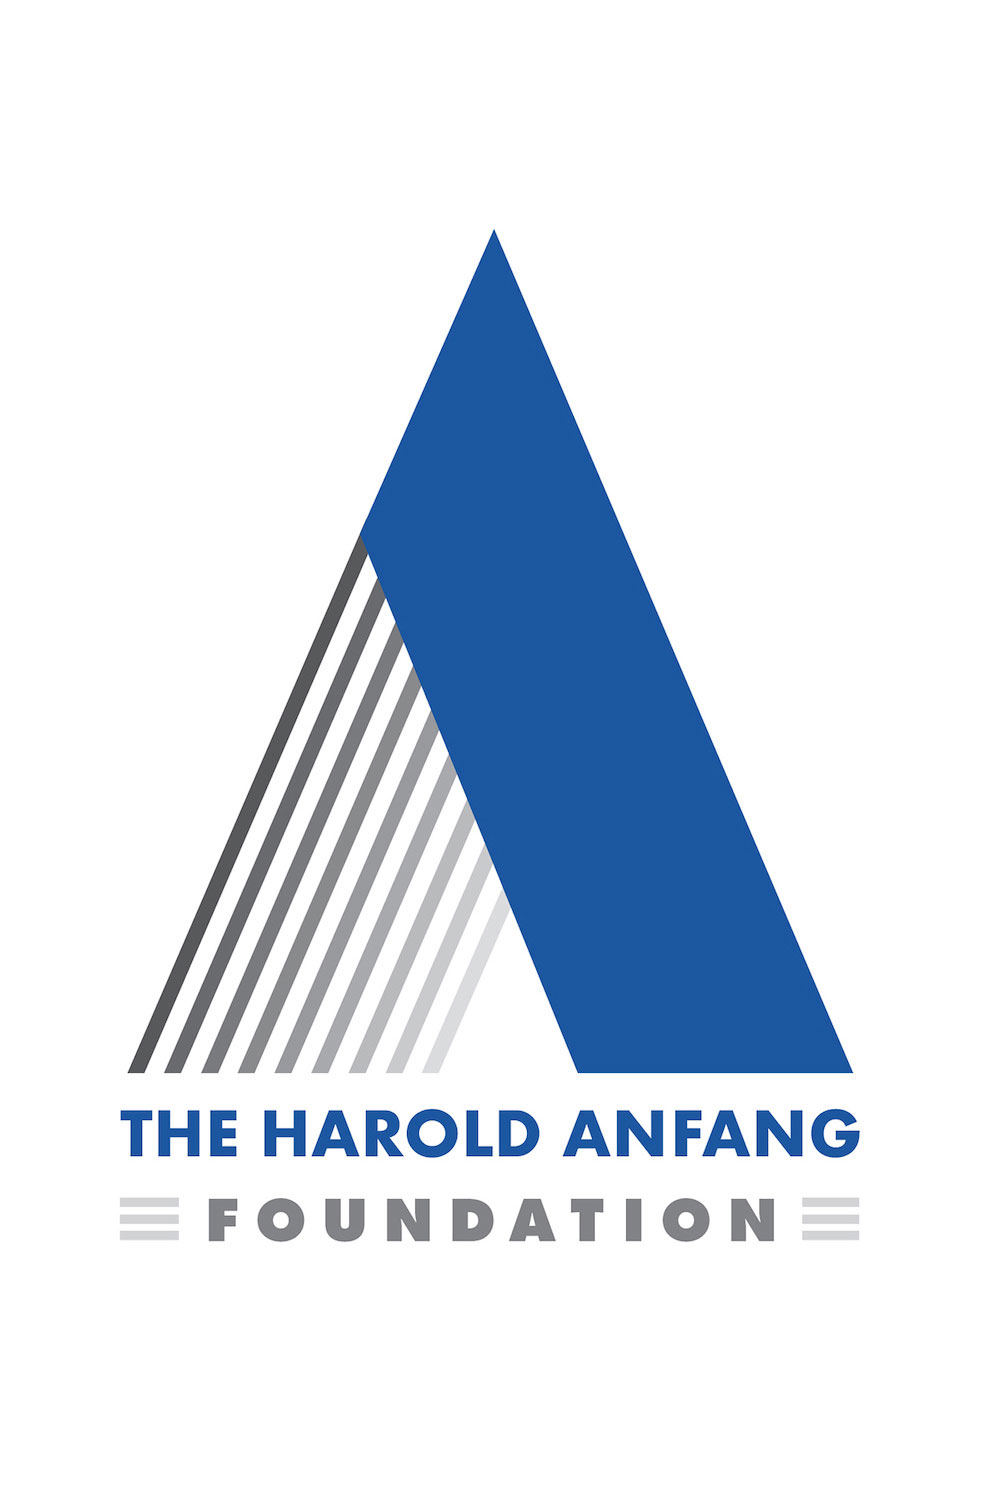 CLIENT:The Harold Anfang Foundation

DATE:January 2022

PROJECT:Logo for charitable foundation